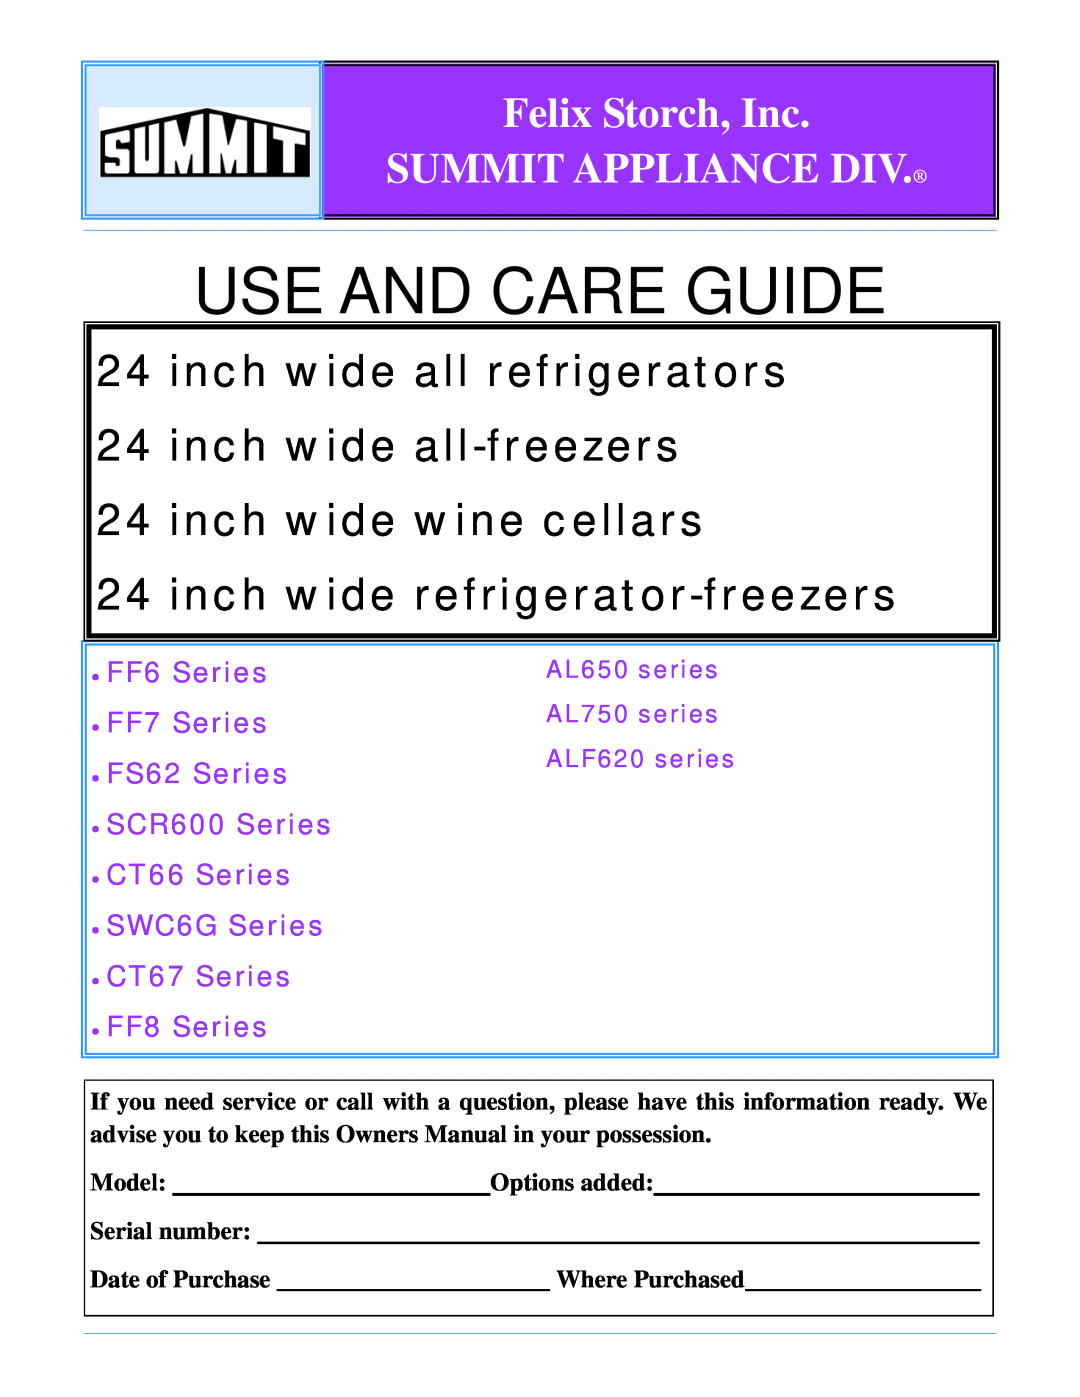 Summit SWC-6G, SCR-600 owner manual Use And Care Guide, inch wide all refrigerators 24 inch wide all-freezers, FF6 Series 